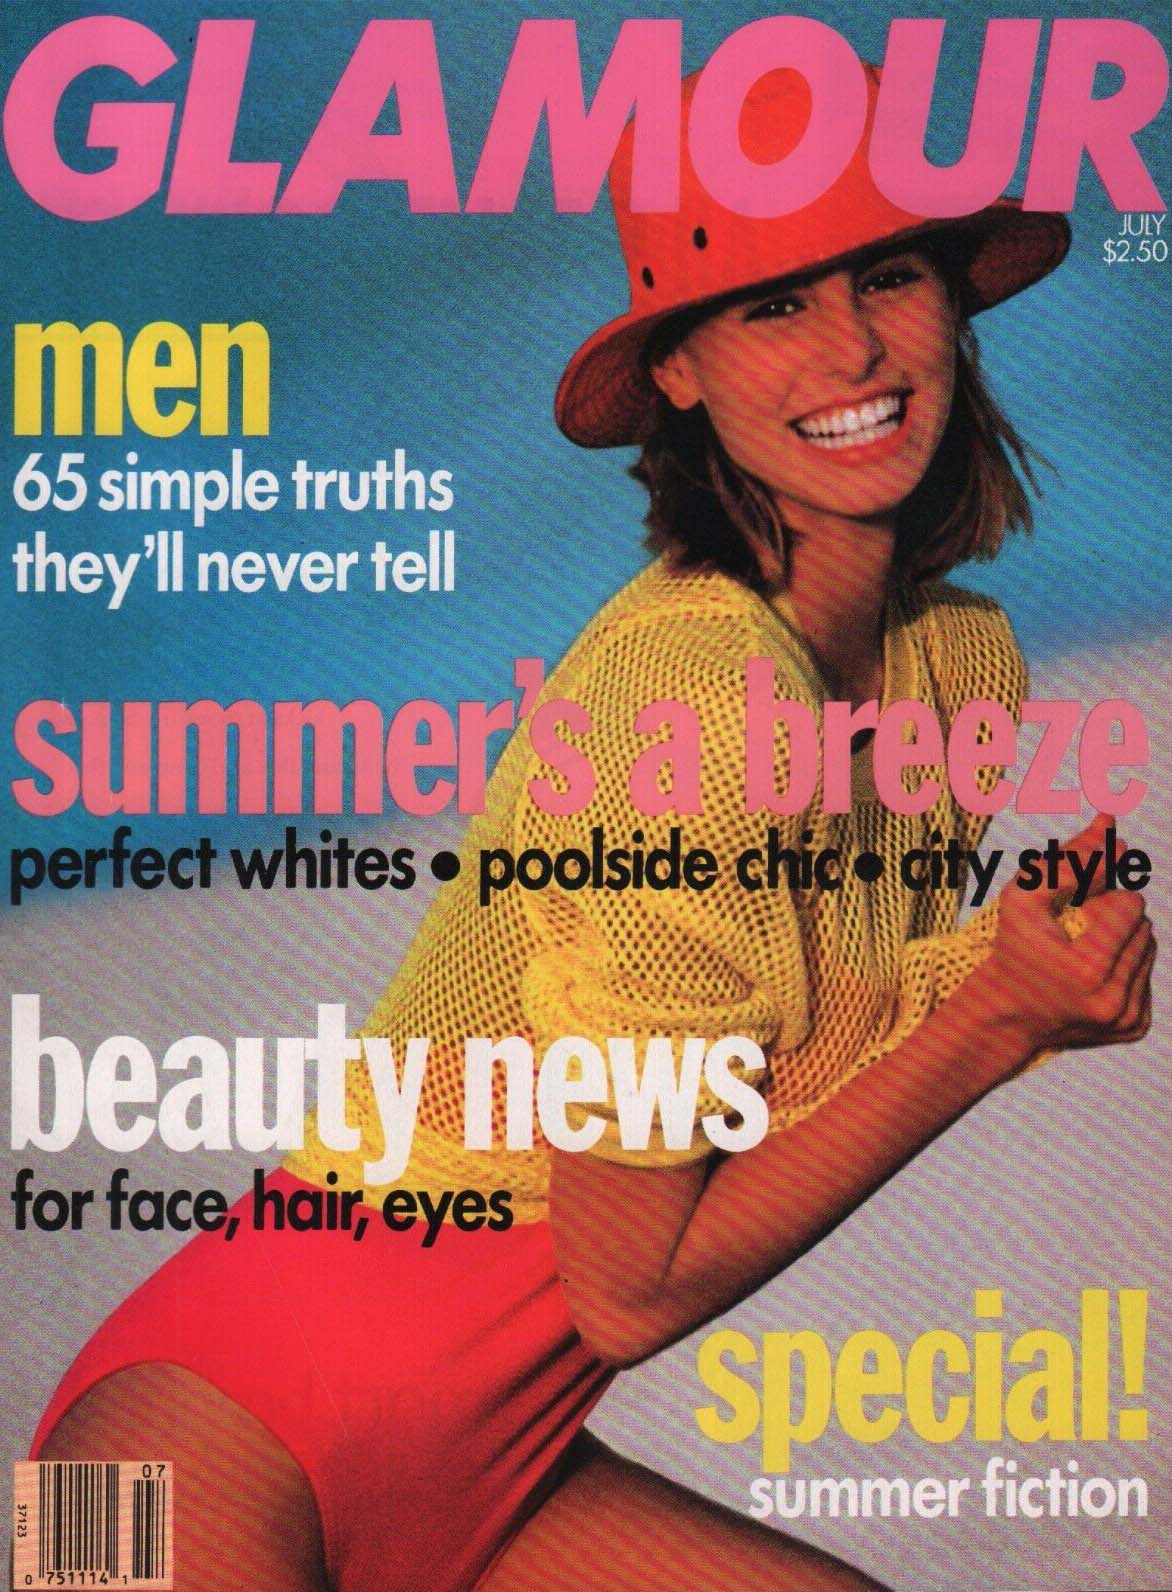 Glamour July 1990 magazine back issue Glamour magizine back copy Glamour July 1990 Womens Magazine Back Issue Published by Conde Nast Publications. Men 65 Simple Truths They'll Never Tell.